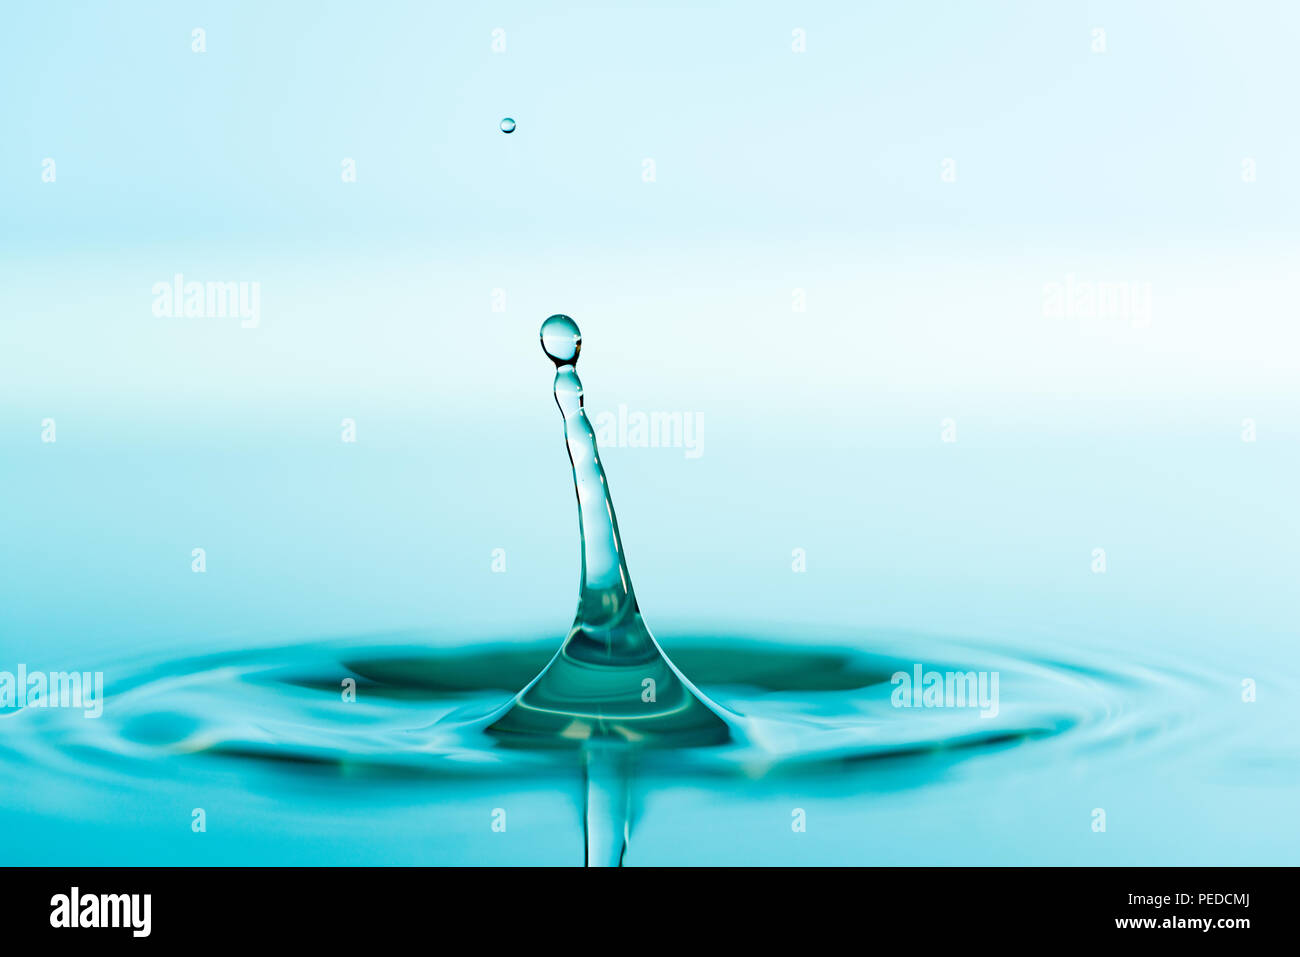 A water glass with a splash – License Images – 11208228 ❘ StockFood